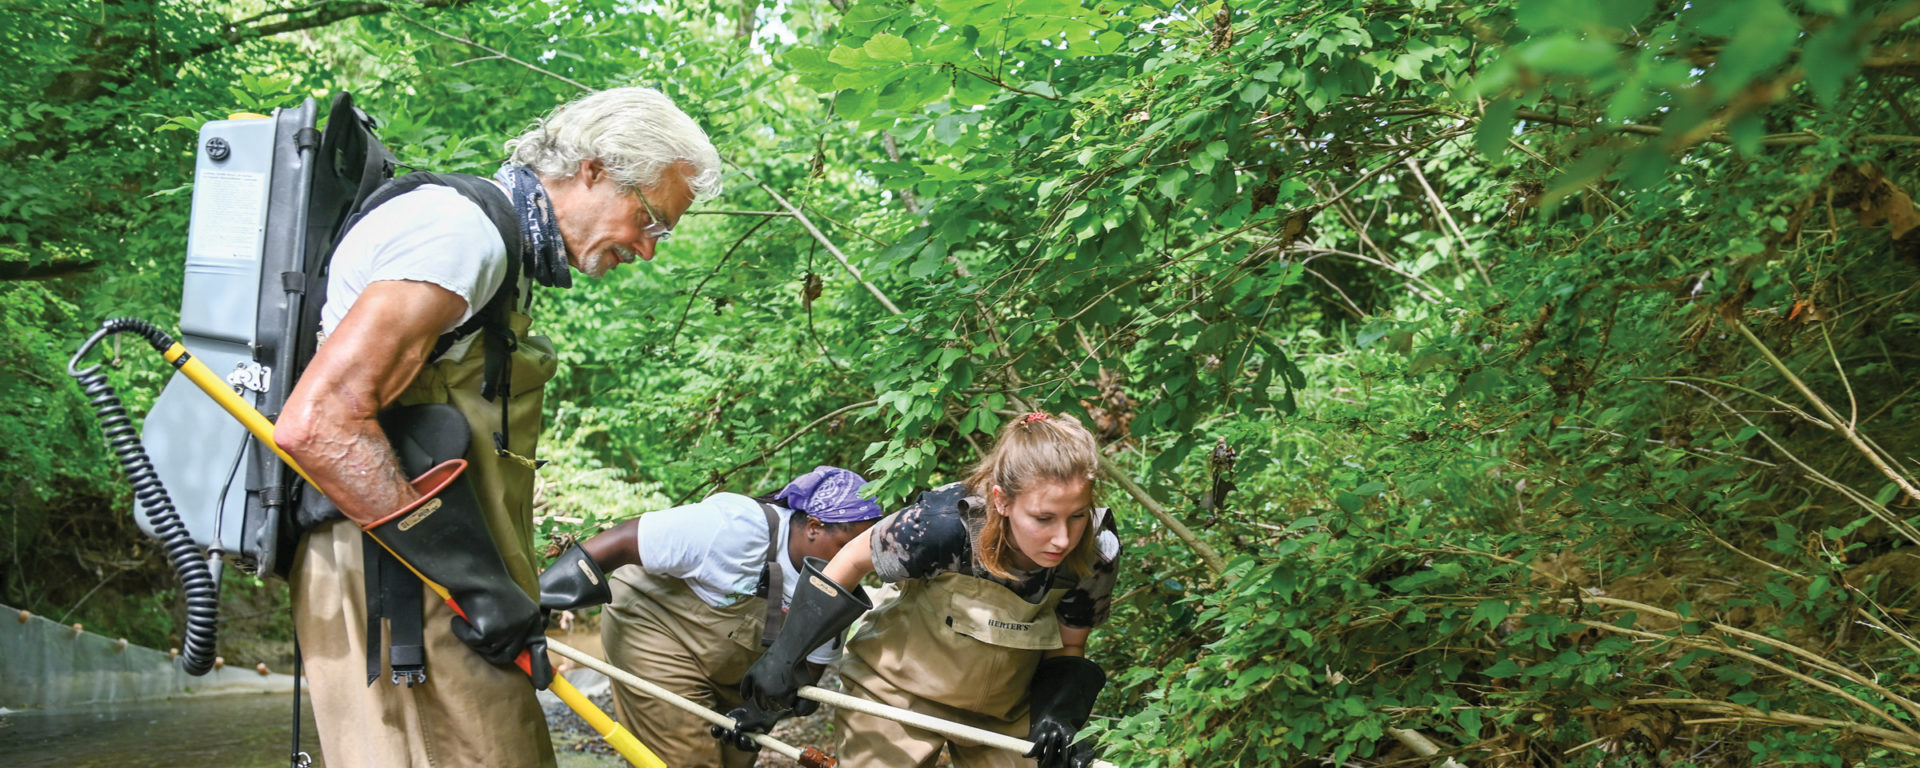 Mark Schorr, UTC professor of biology, geology and environmental science, works to determine stream quality with UTC students Kendra Keller, left, and Jasmin Barton-Holt.